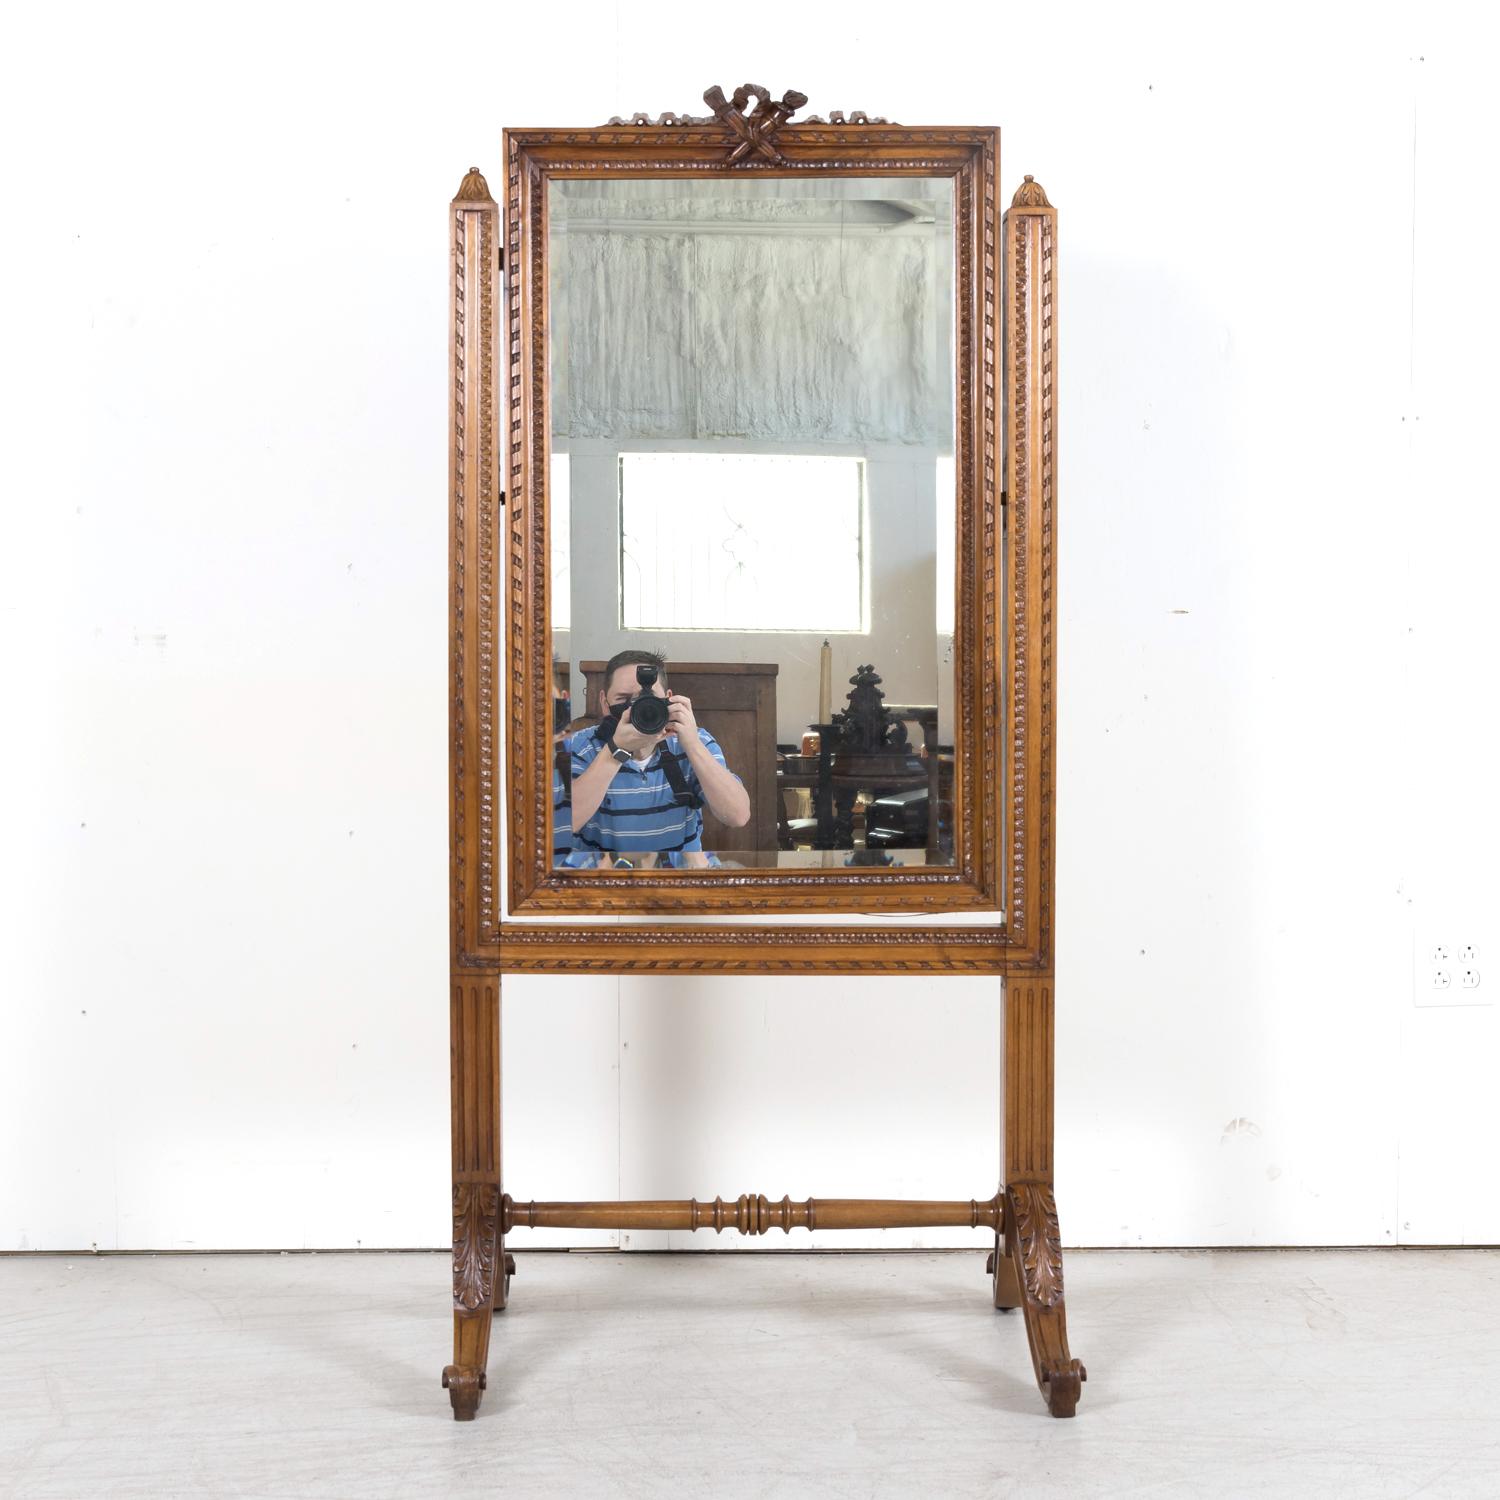 A exceptional 19th century Louis XVI style cheval dressing mirror handcrafted of walnut, circa 1880s, having the original beveled mirror inside a beautifully carved walnut frame featuring typical neoclassical motifs from the period. The carved crest